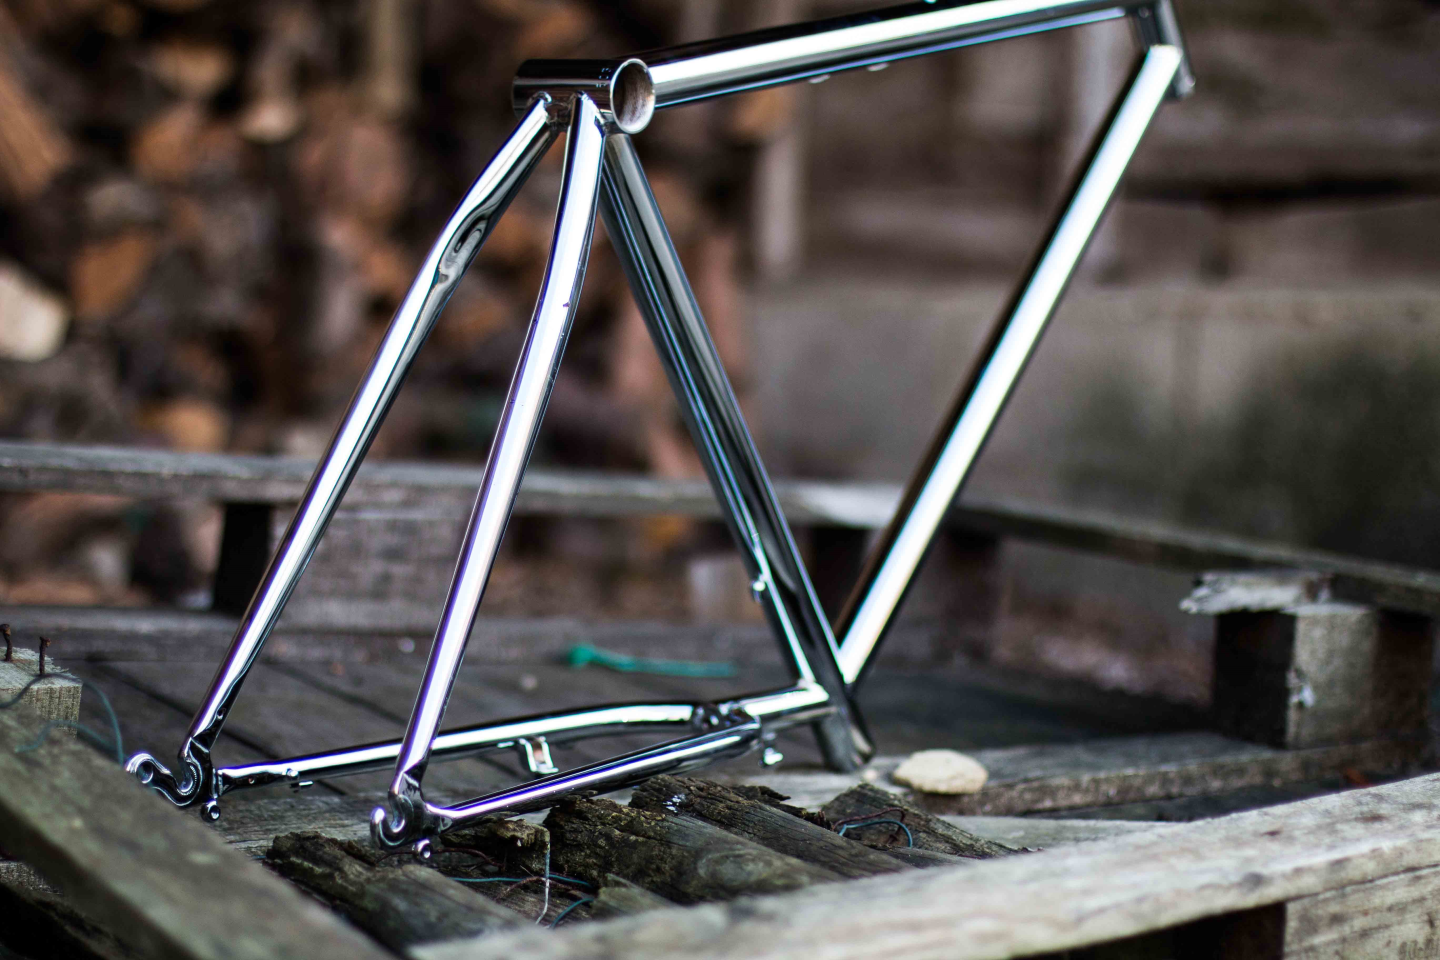 Picture of a bicycle frame finished in chrome.